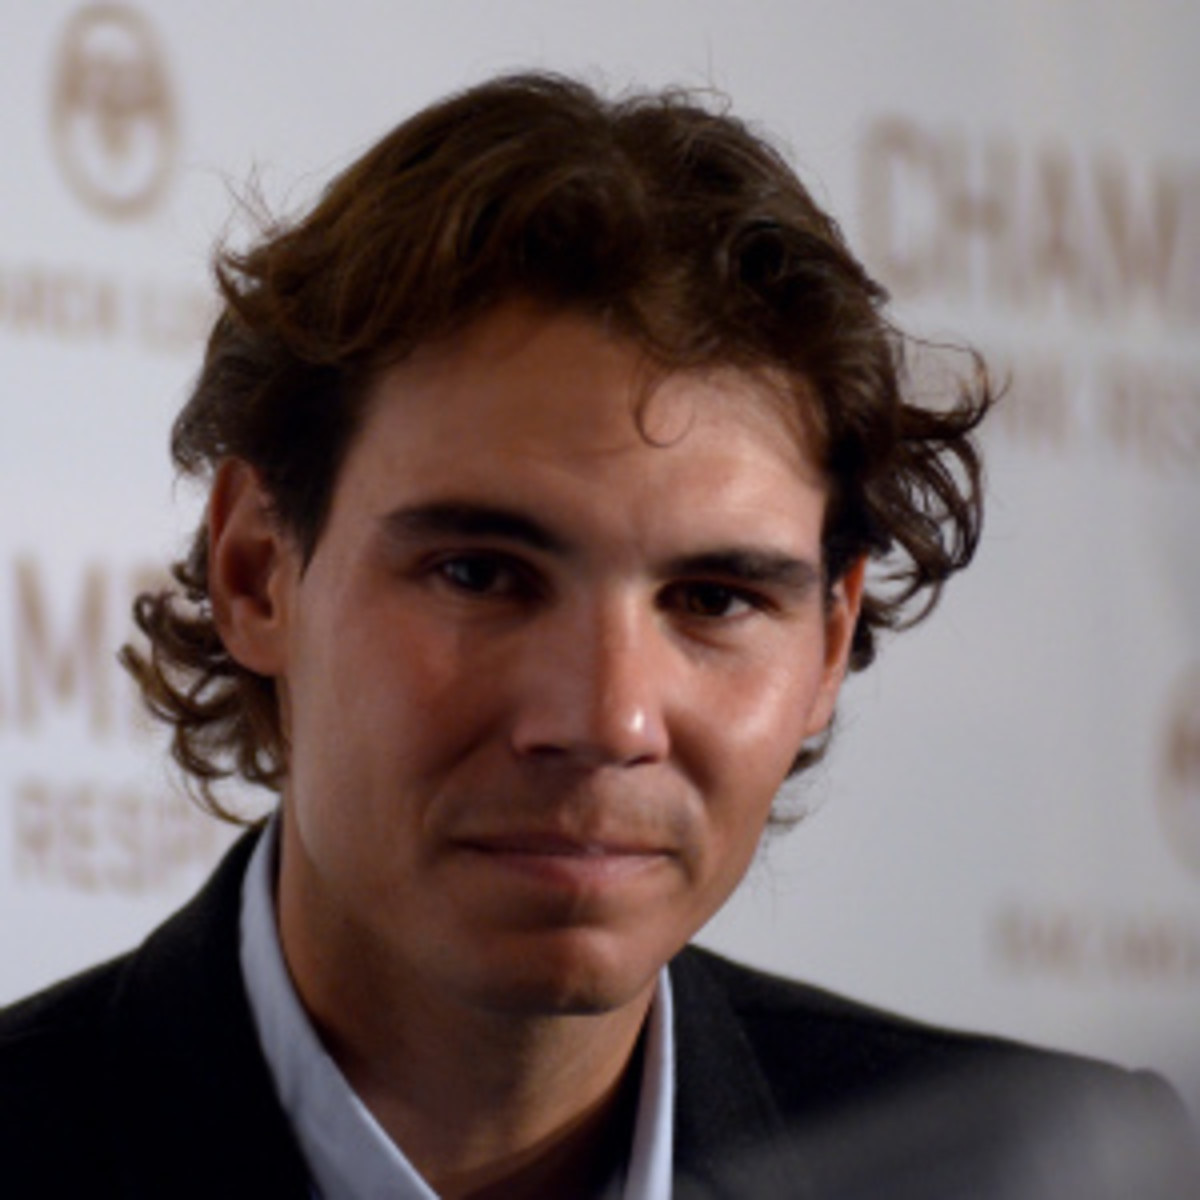 Rafael Nadal will play the Chile Open before heading to Brazil. (Robert Marquardt/Getty Images)